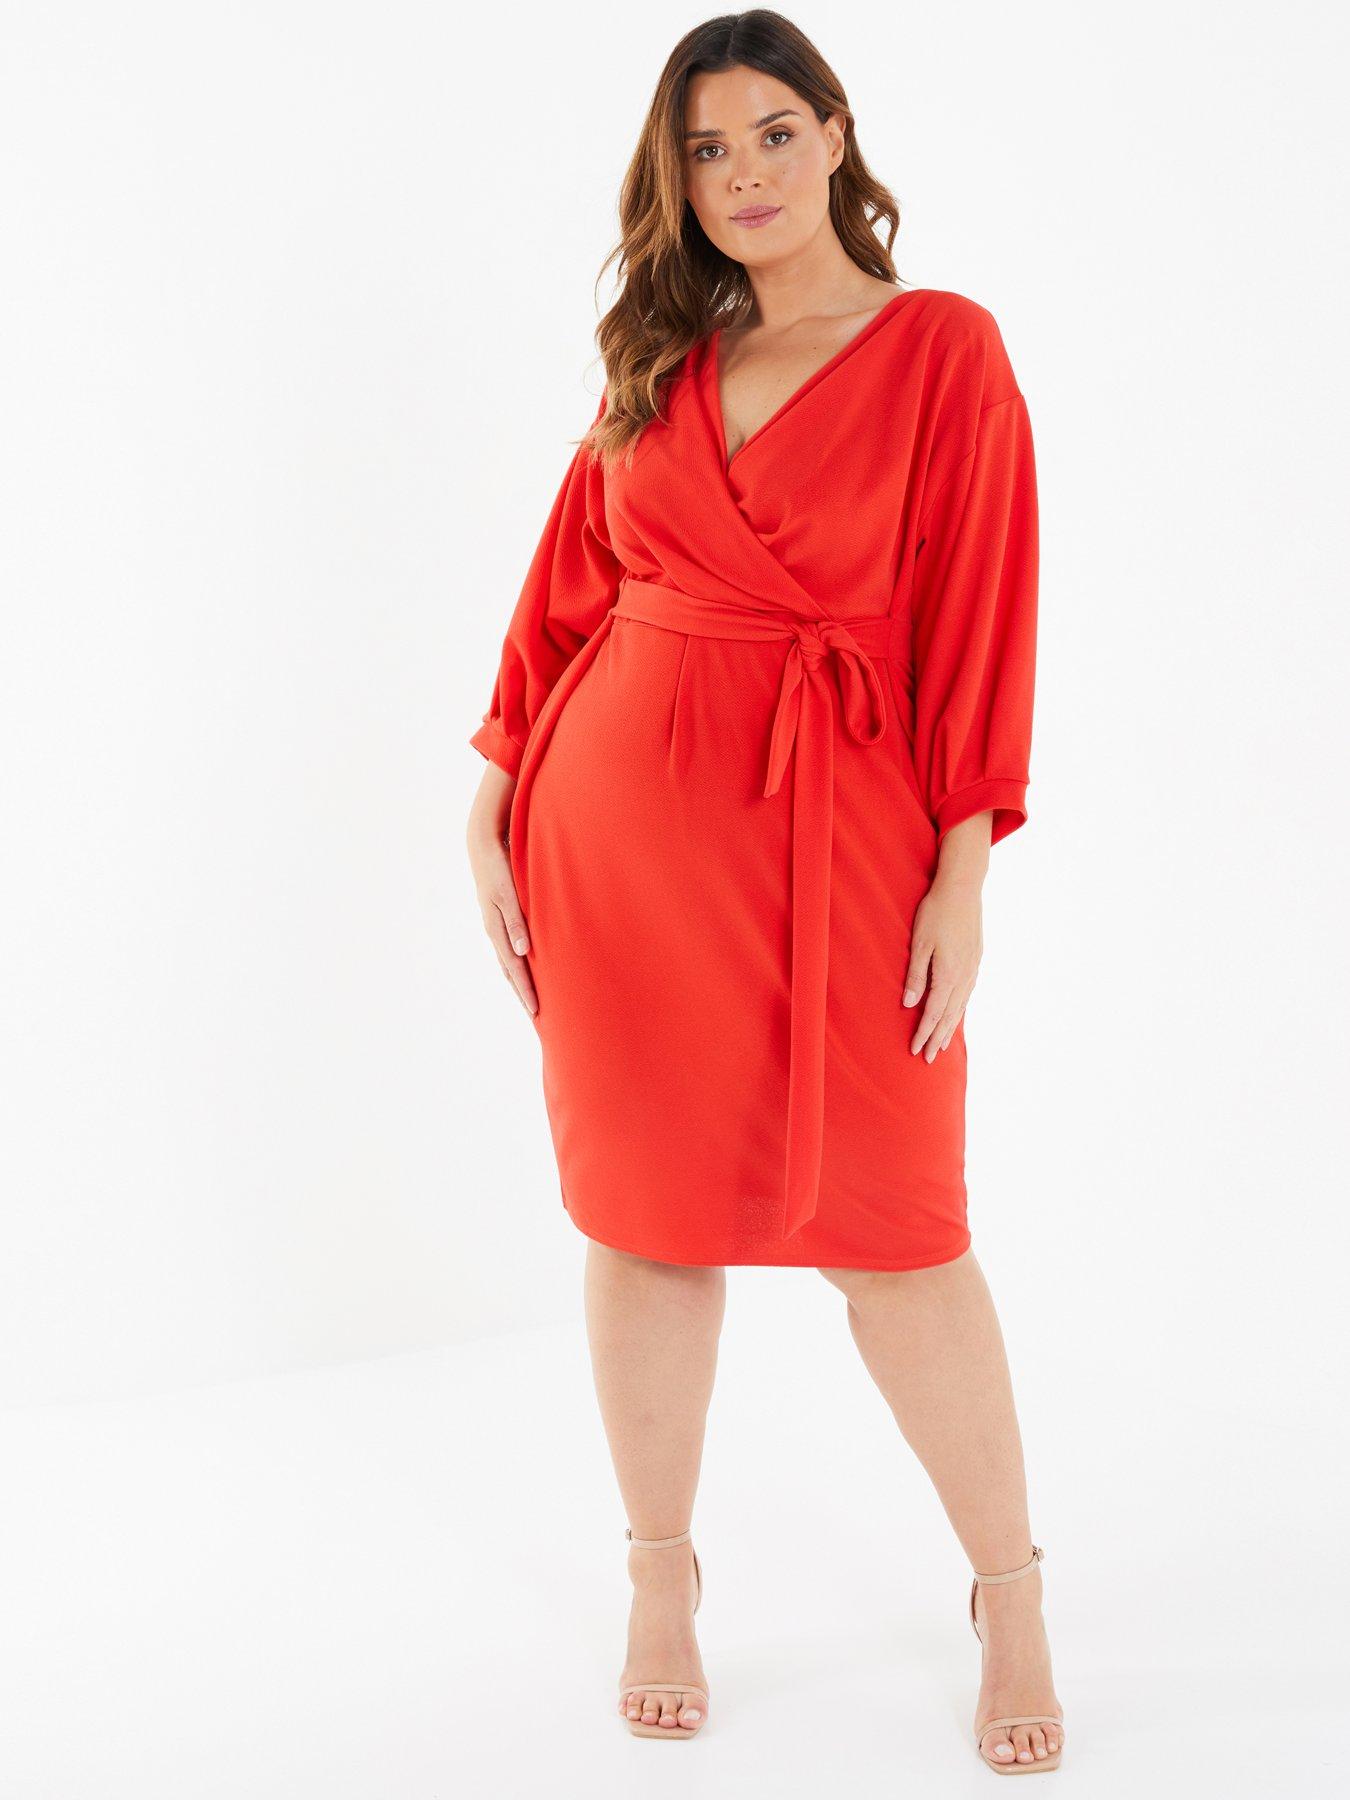 Details about   Maternity Coral 3/4 Flute Sleeve Dress 